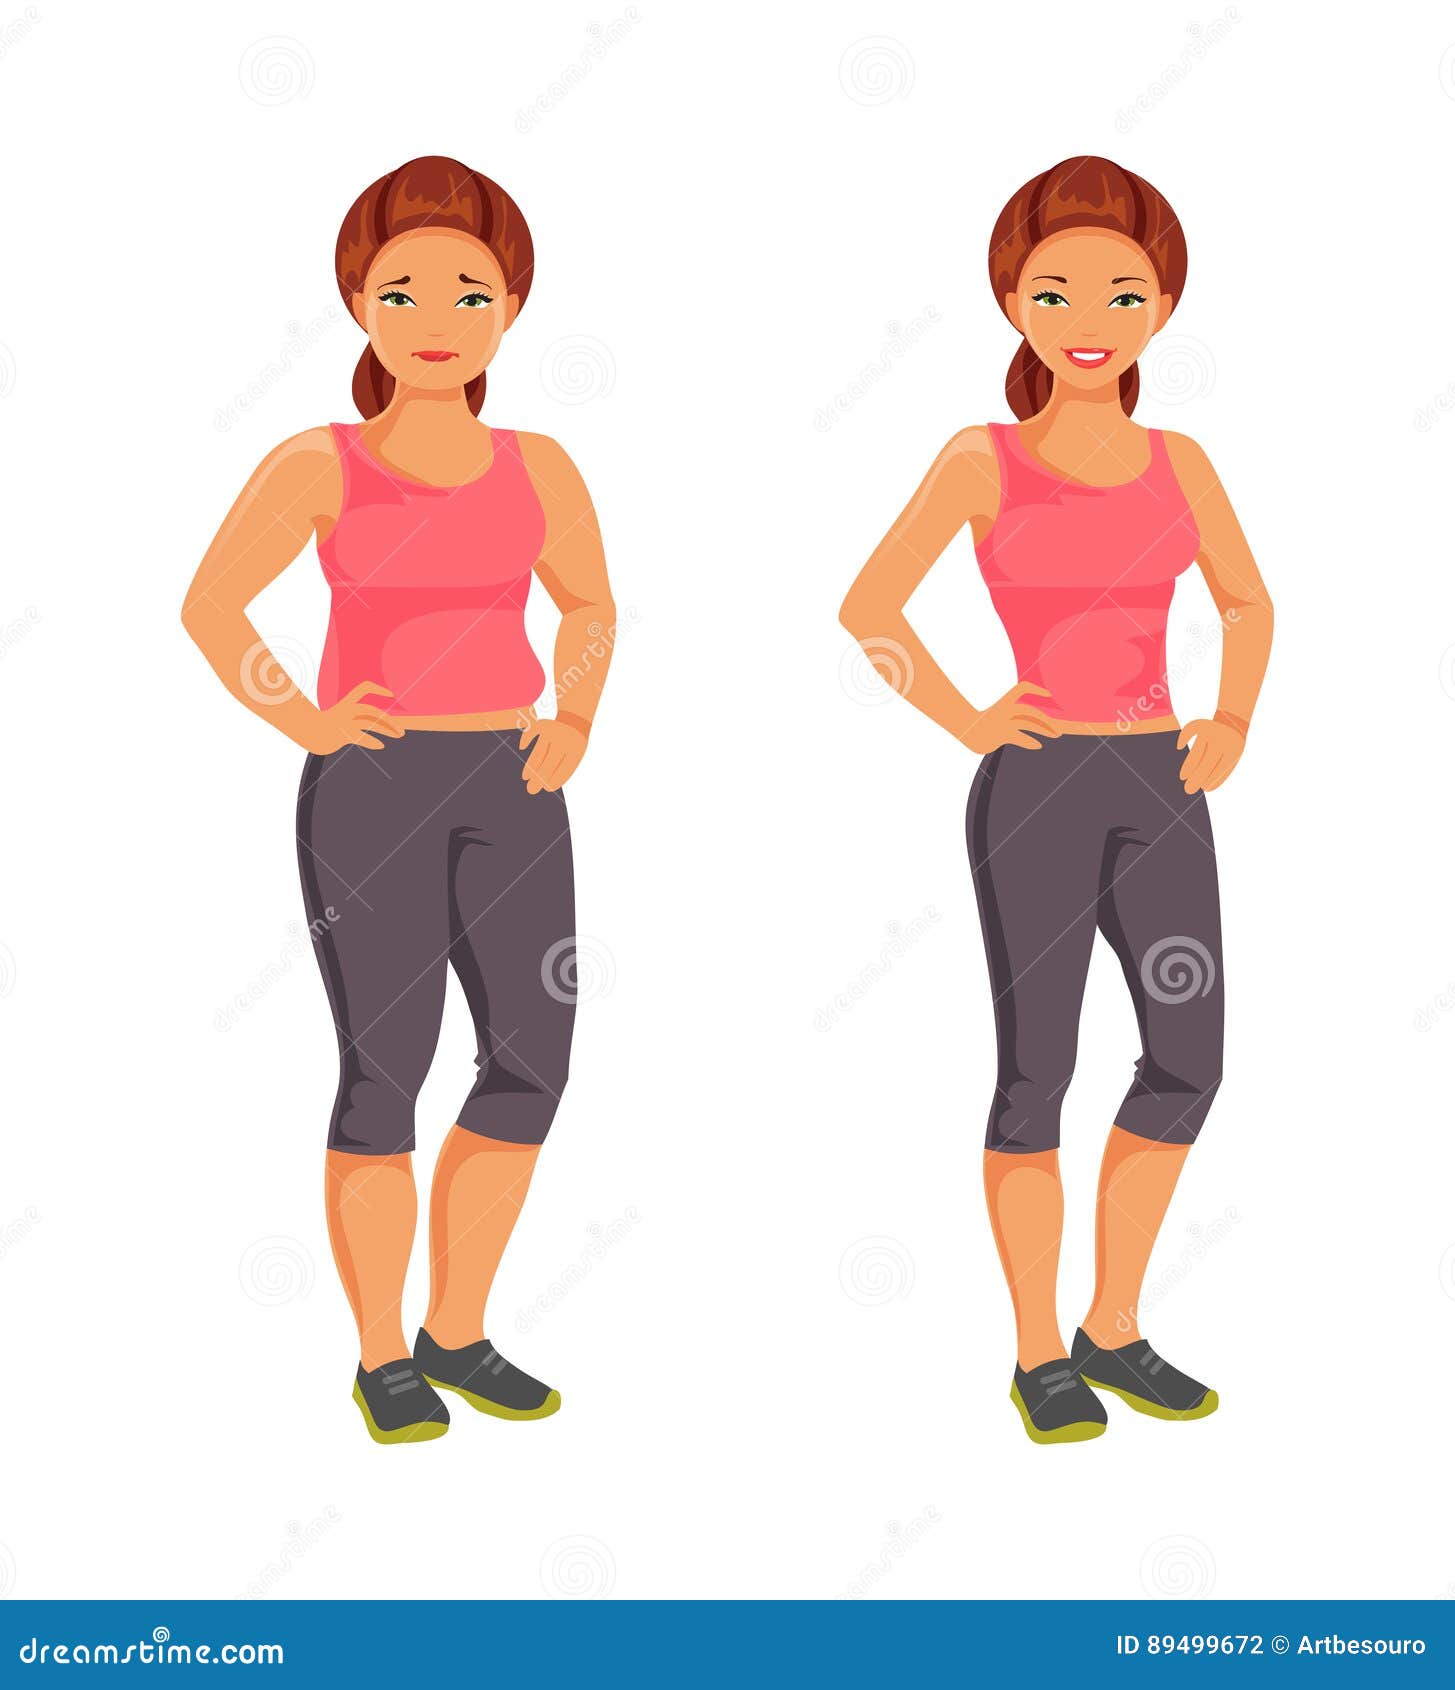 56,947 Thin Woman Weight Loss Images, Stock Photos, 3D objects, & Vectors